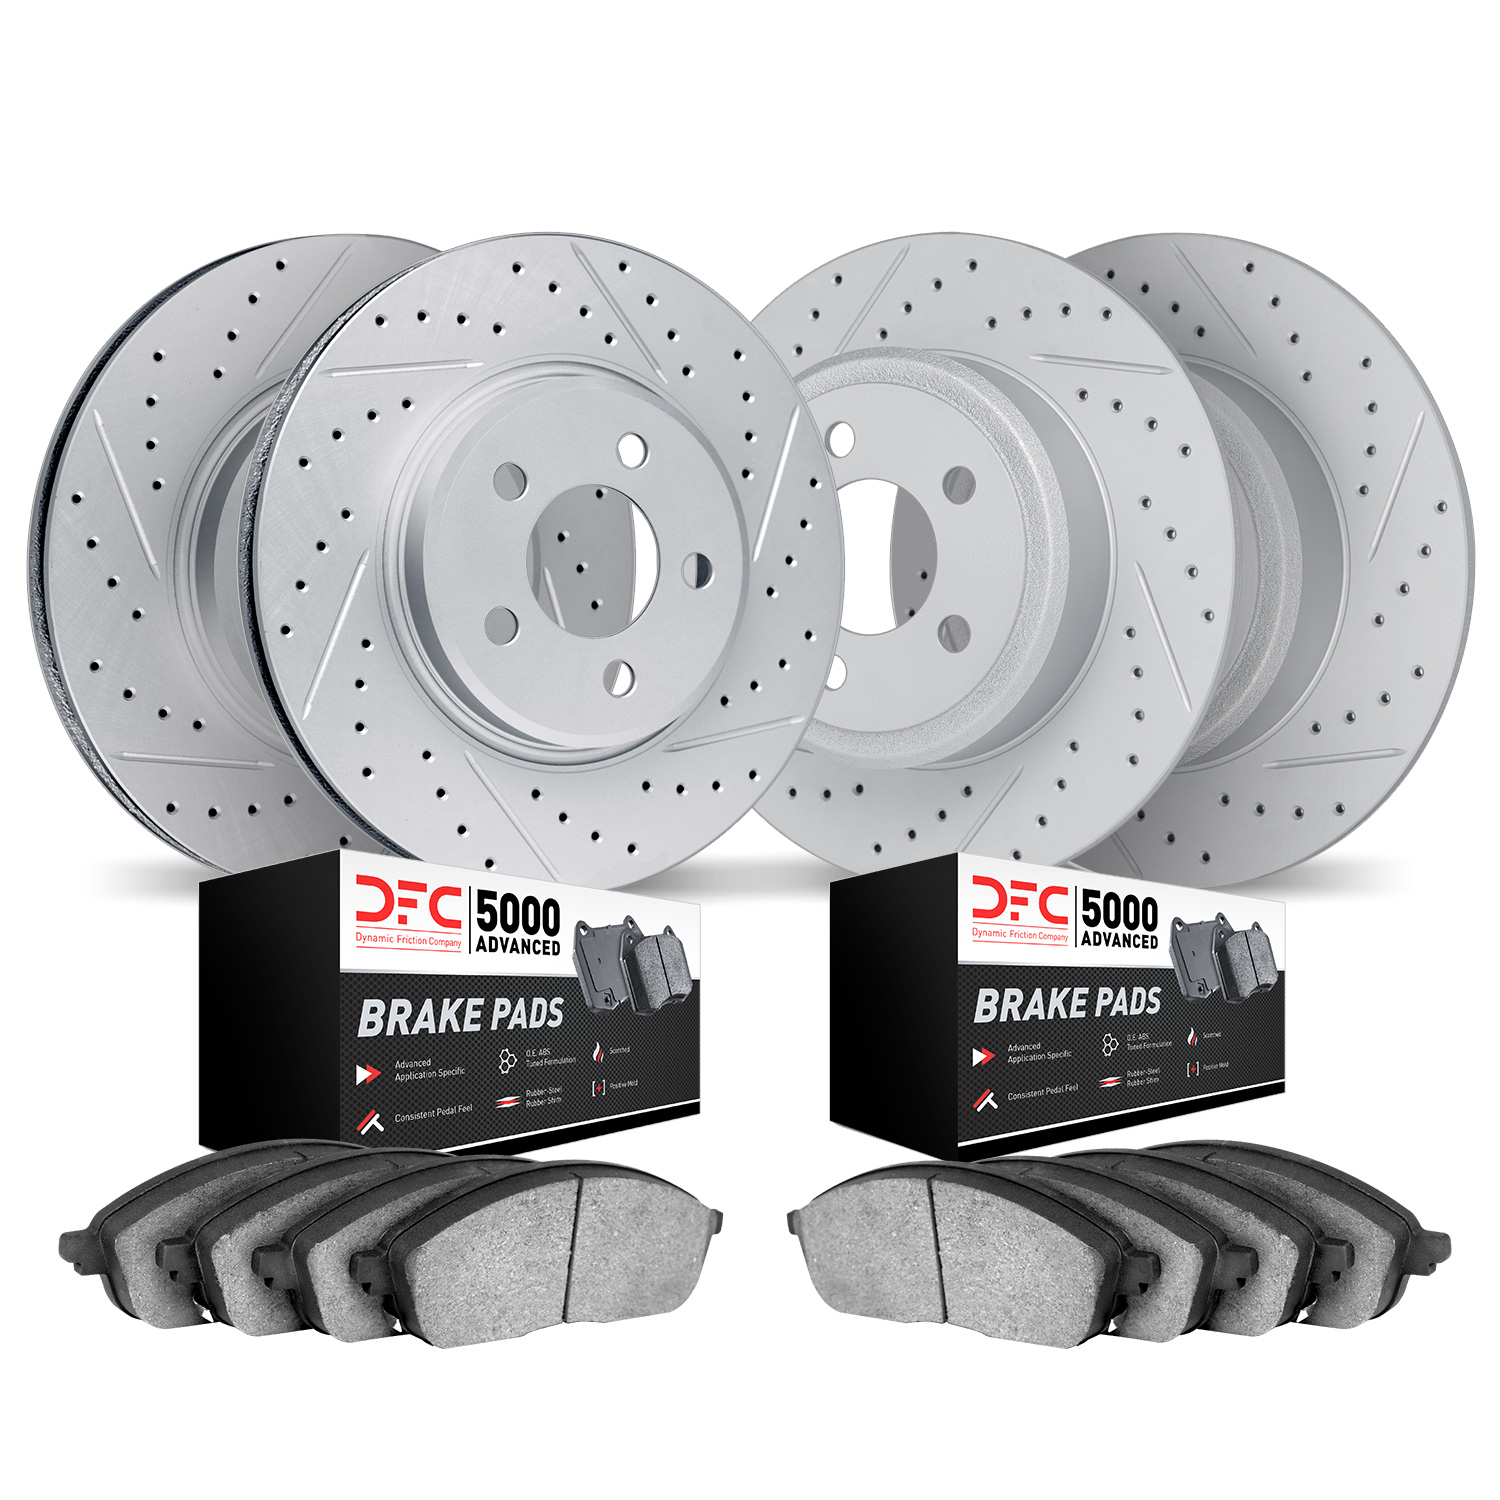 2504-53014 Geoperformance Drilled/Slotted Rotors w/5000 Advanced Brake Pads Kit, 2004-2012 GM, Position: Front and Rear